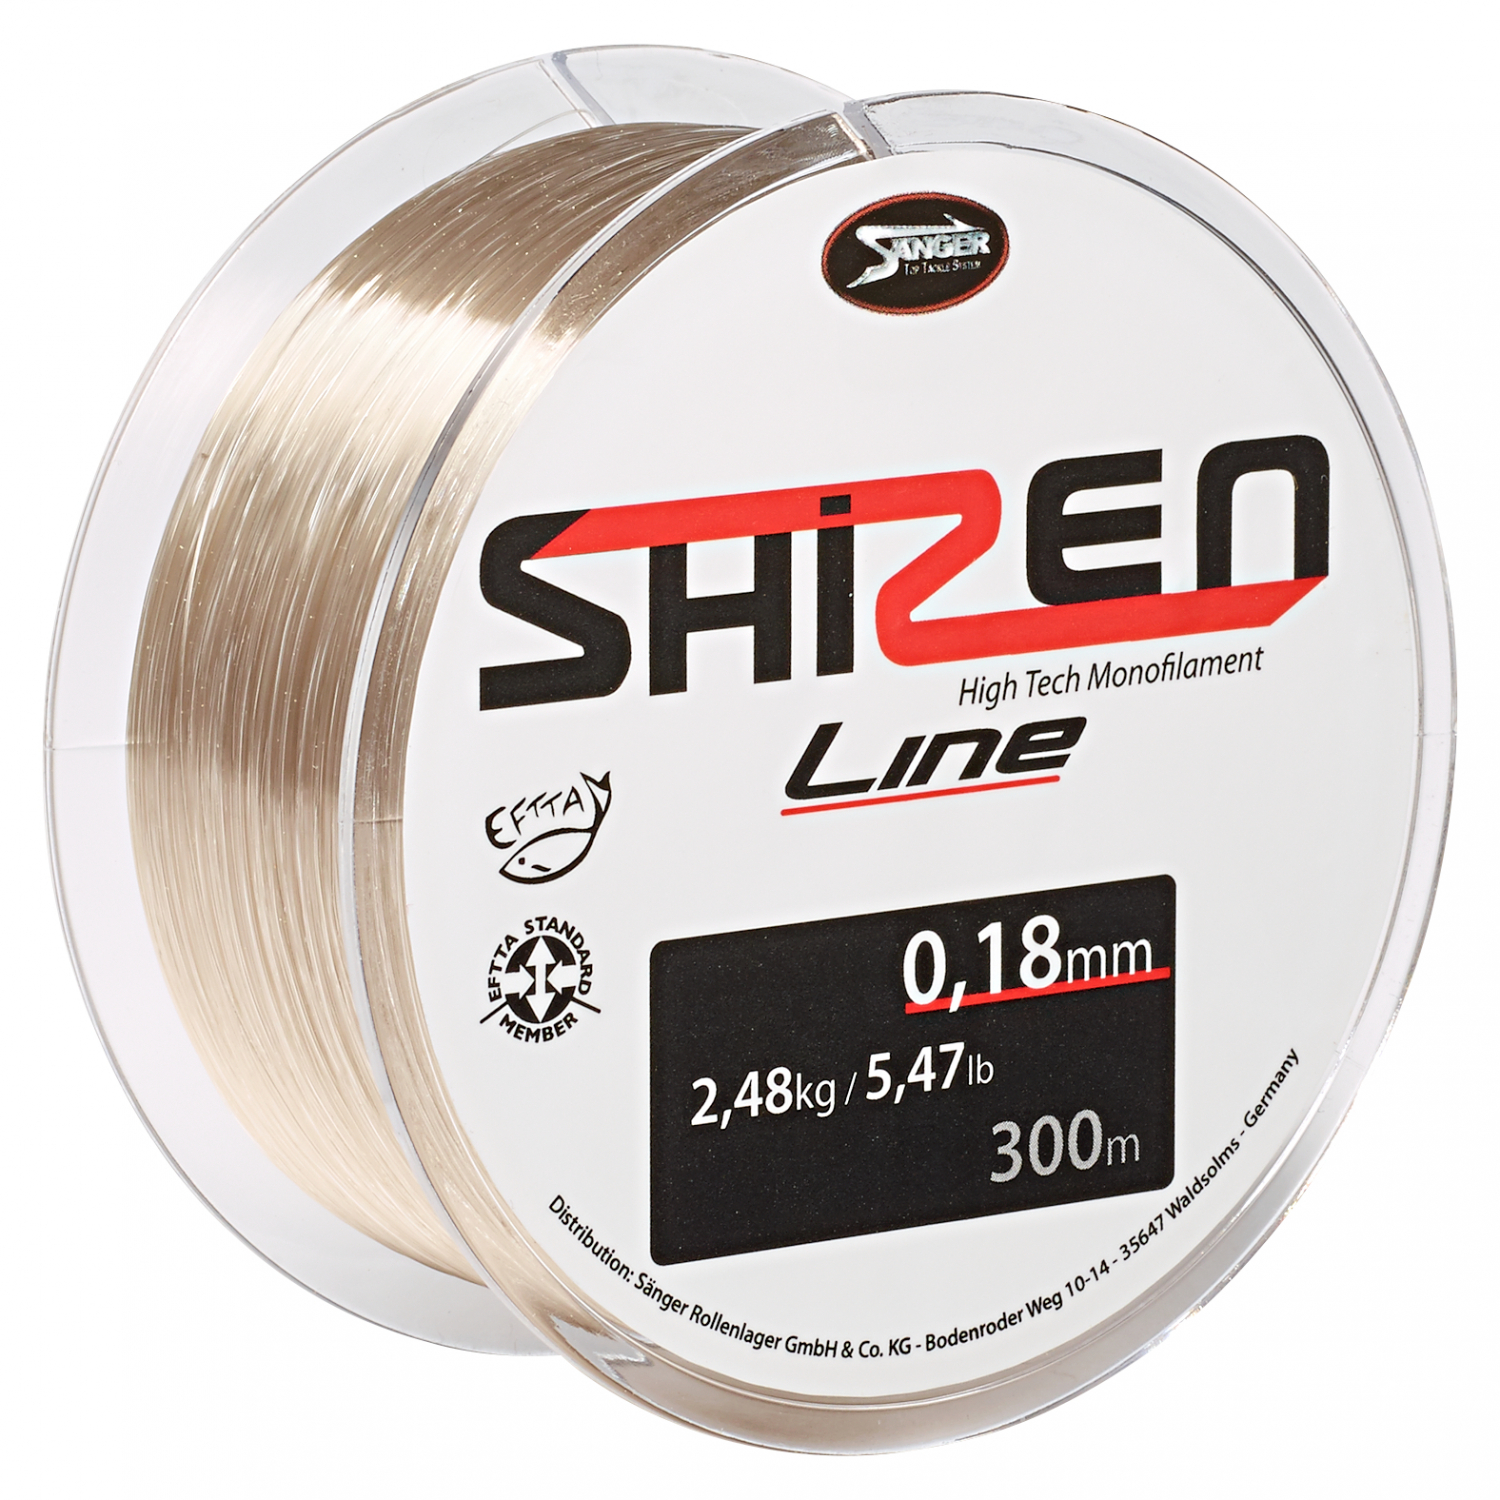 Sänger Fishing Line Shizen Mono (clear, 3.000 m) at low prices